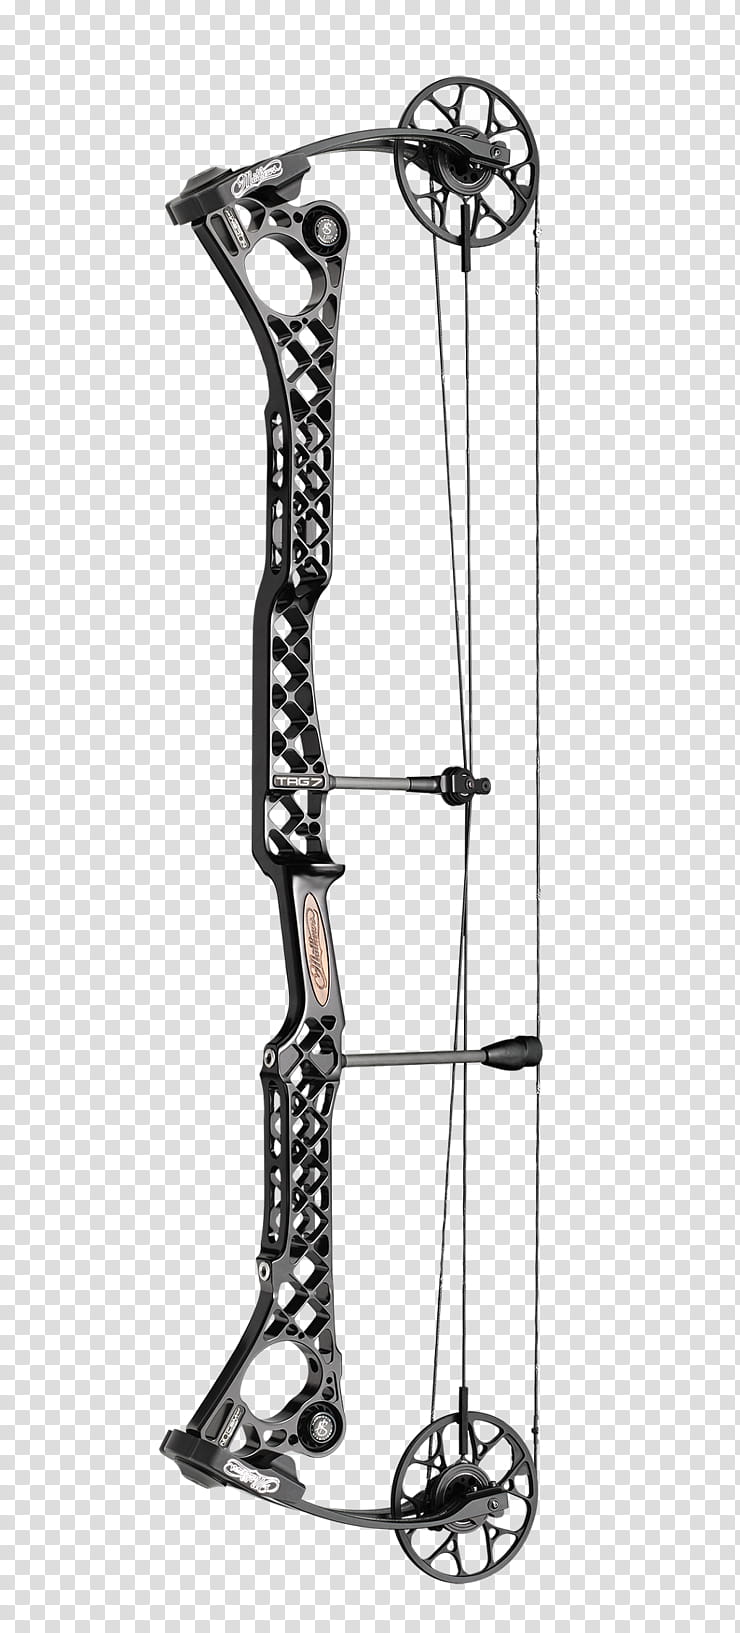 Bow And Arrow, Compound Bows, Bowhunting, Archery, Carbon Express Xforce Blade Crossbow, Sales, Cam, Mathews Archery Inc transparent background PNG clipart